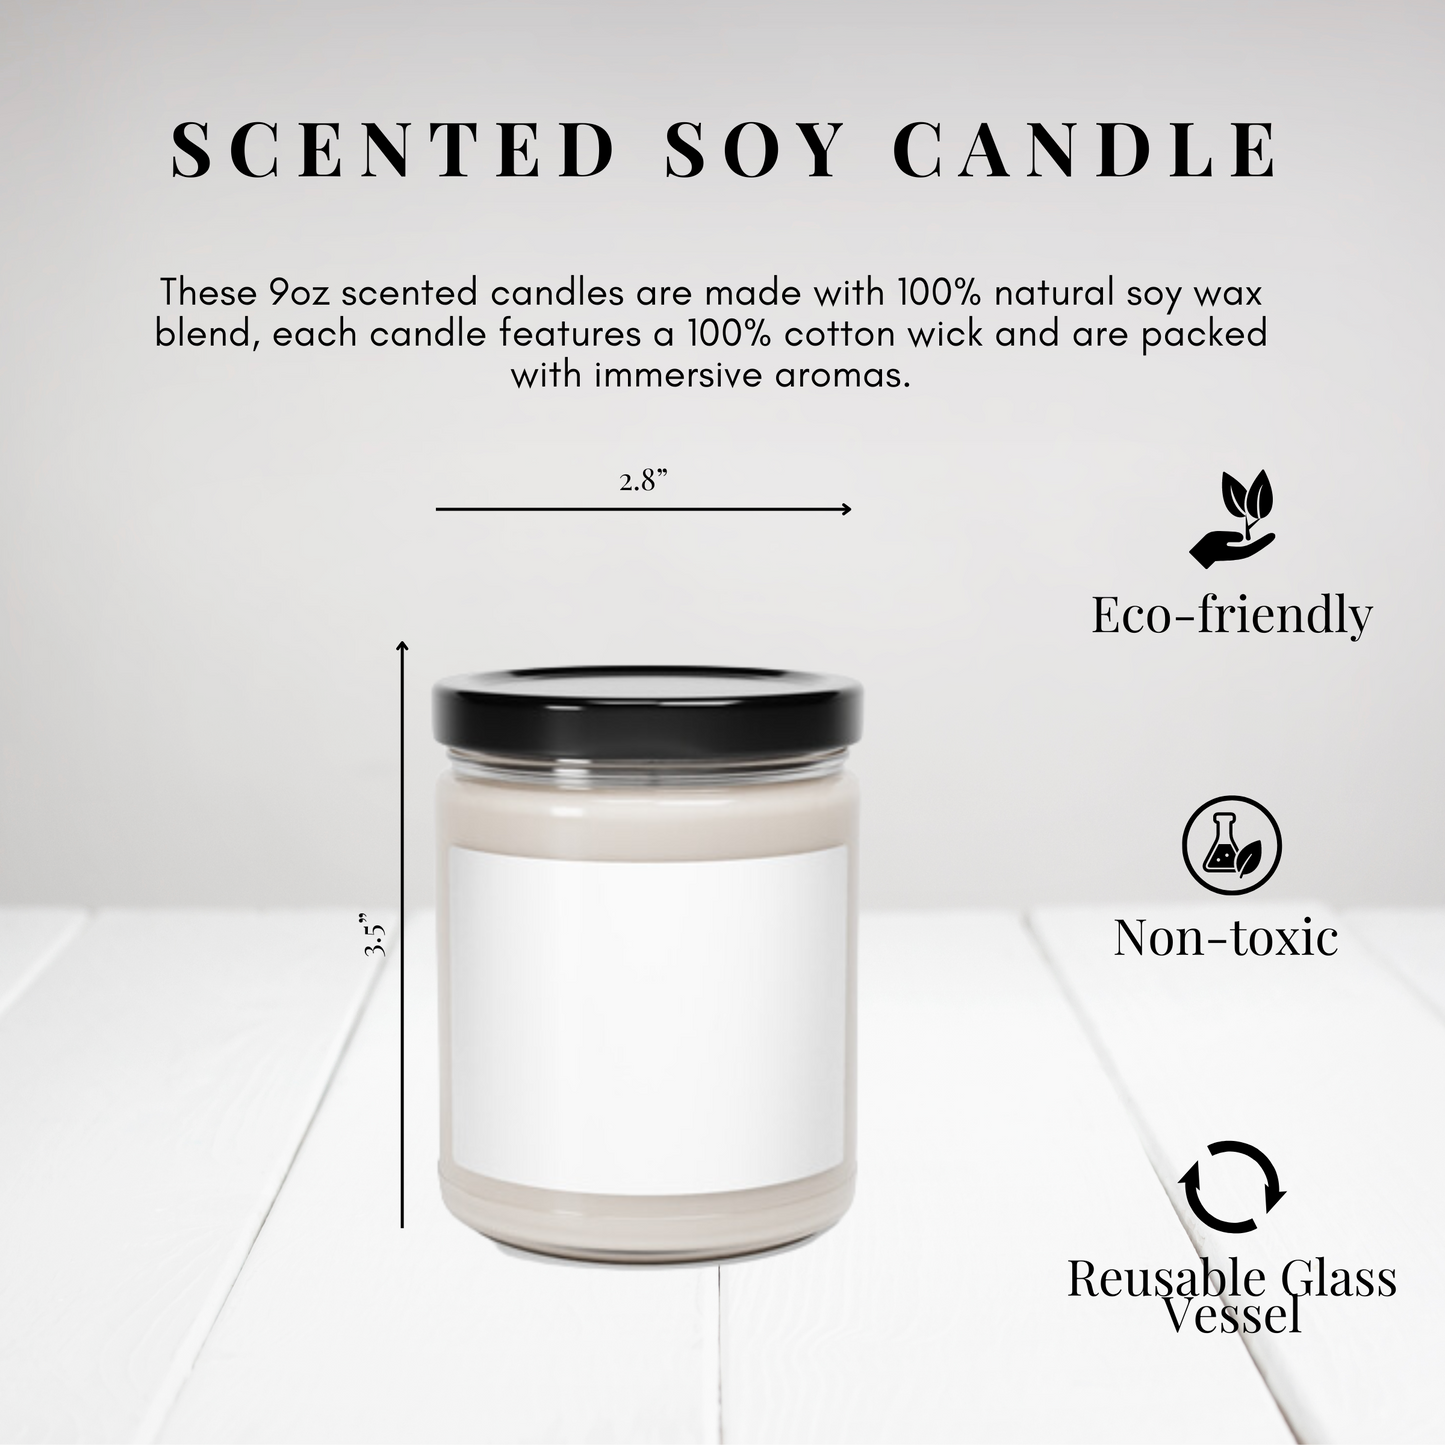 Funny Scented Soy Candle Don't Do Meth in our Bathroom 9oz